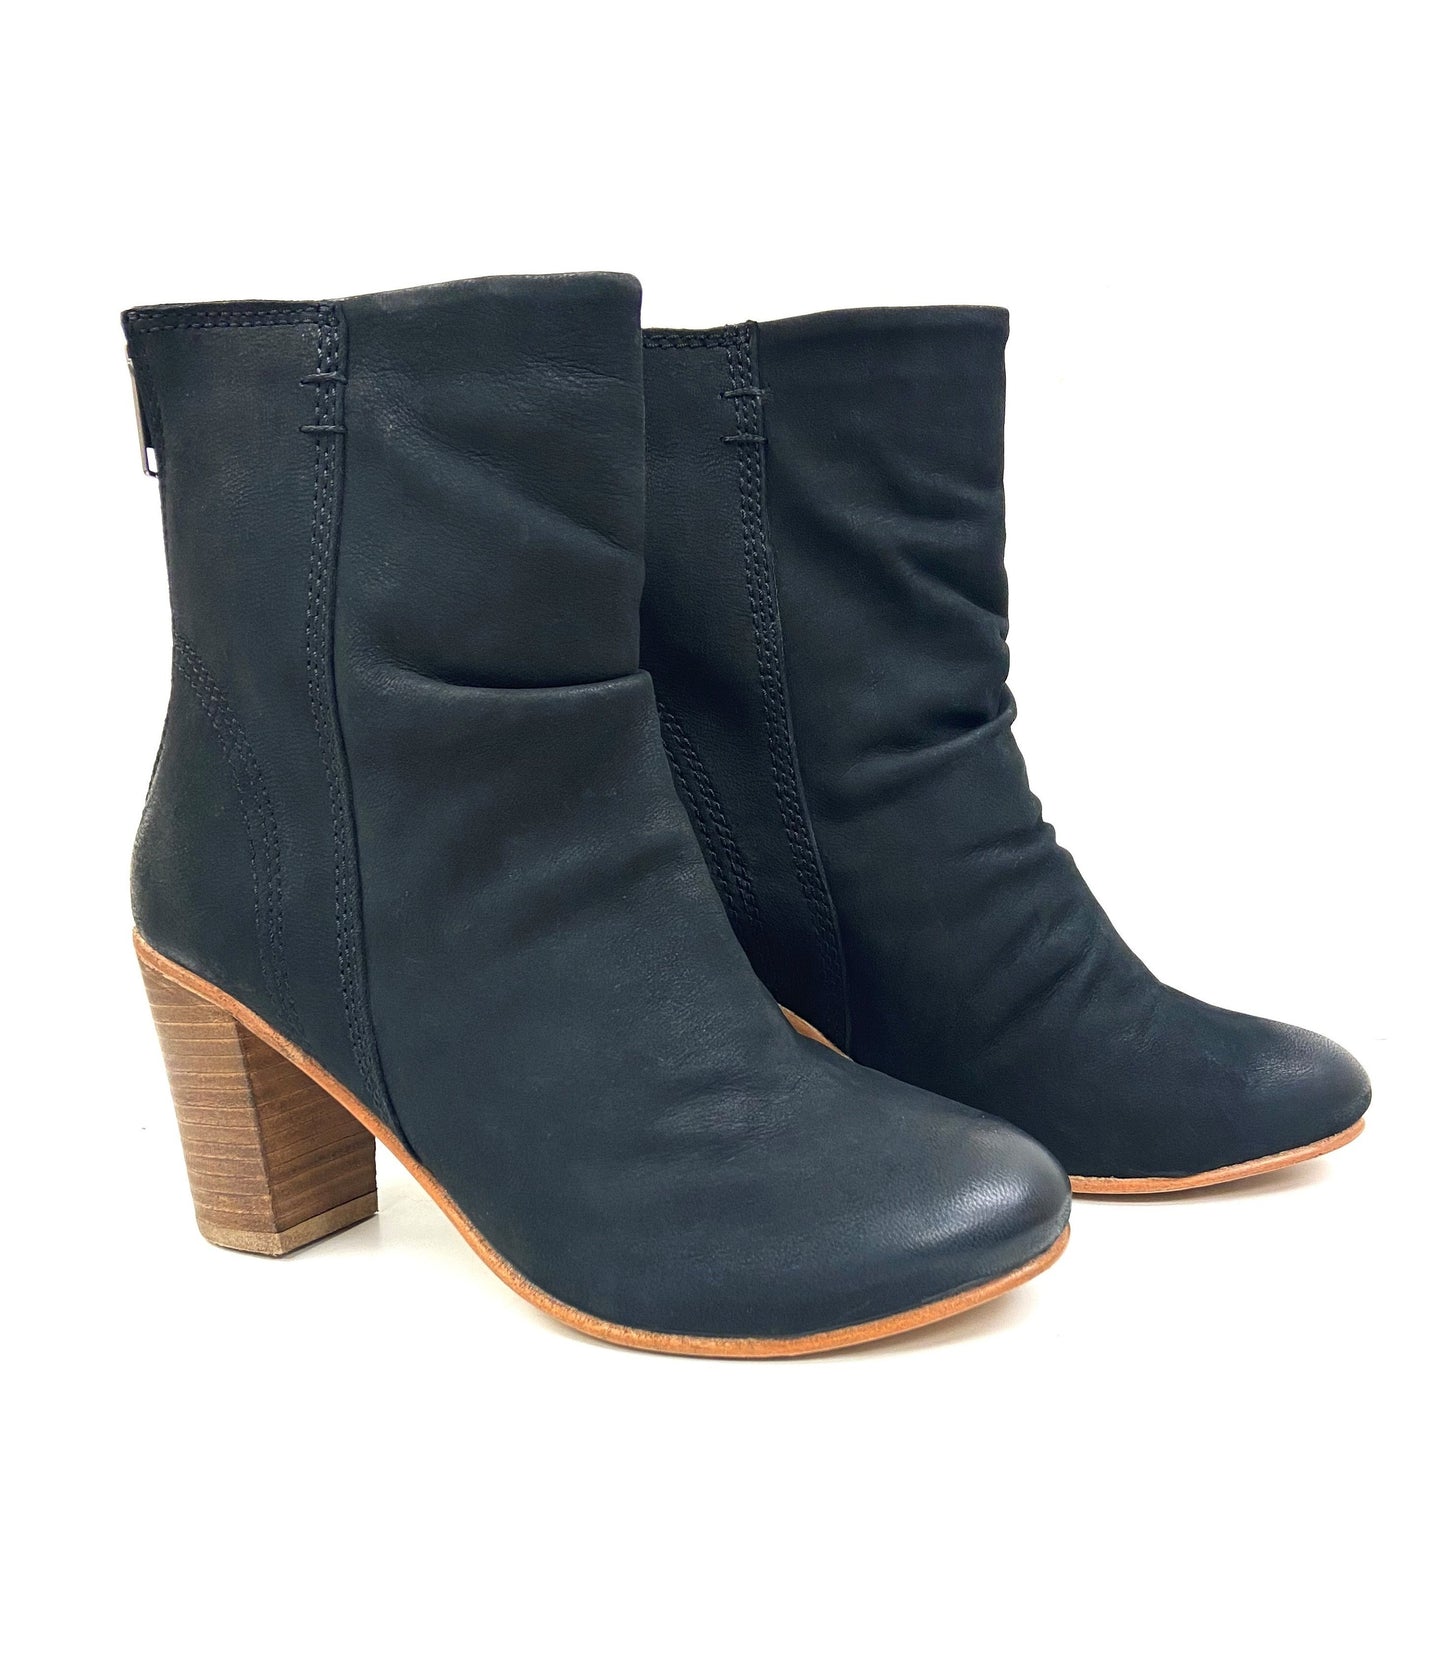 High Stacked Heel Slouchy Suede Boot